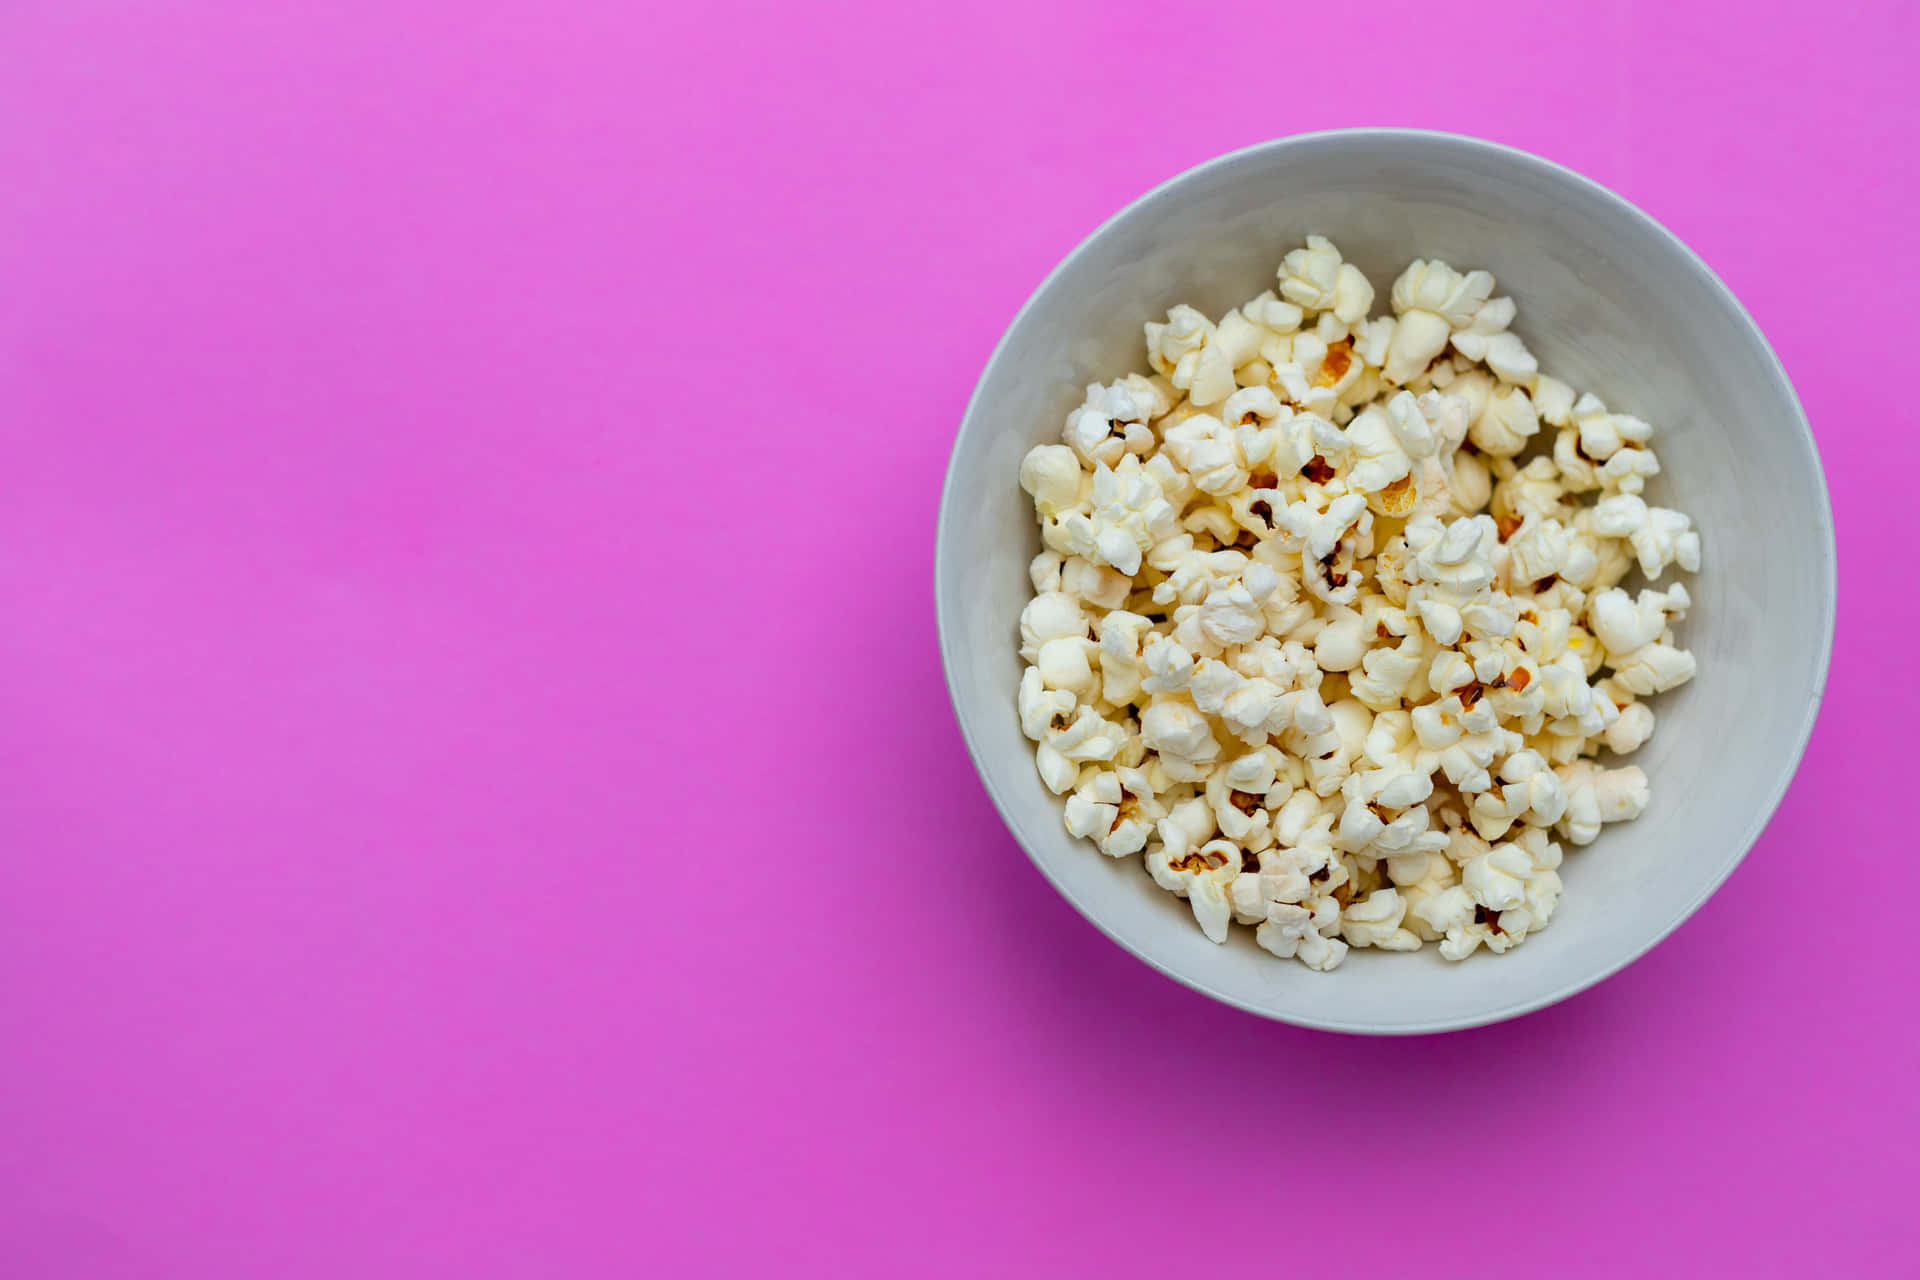 A Bowl Of Popcorn On A Pink Background